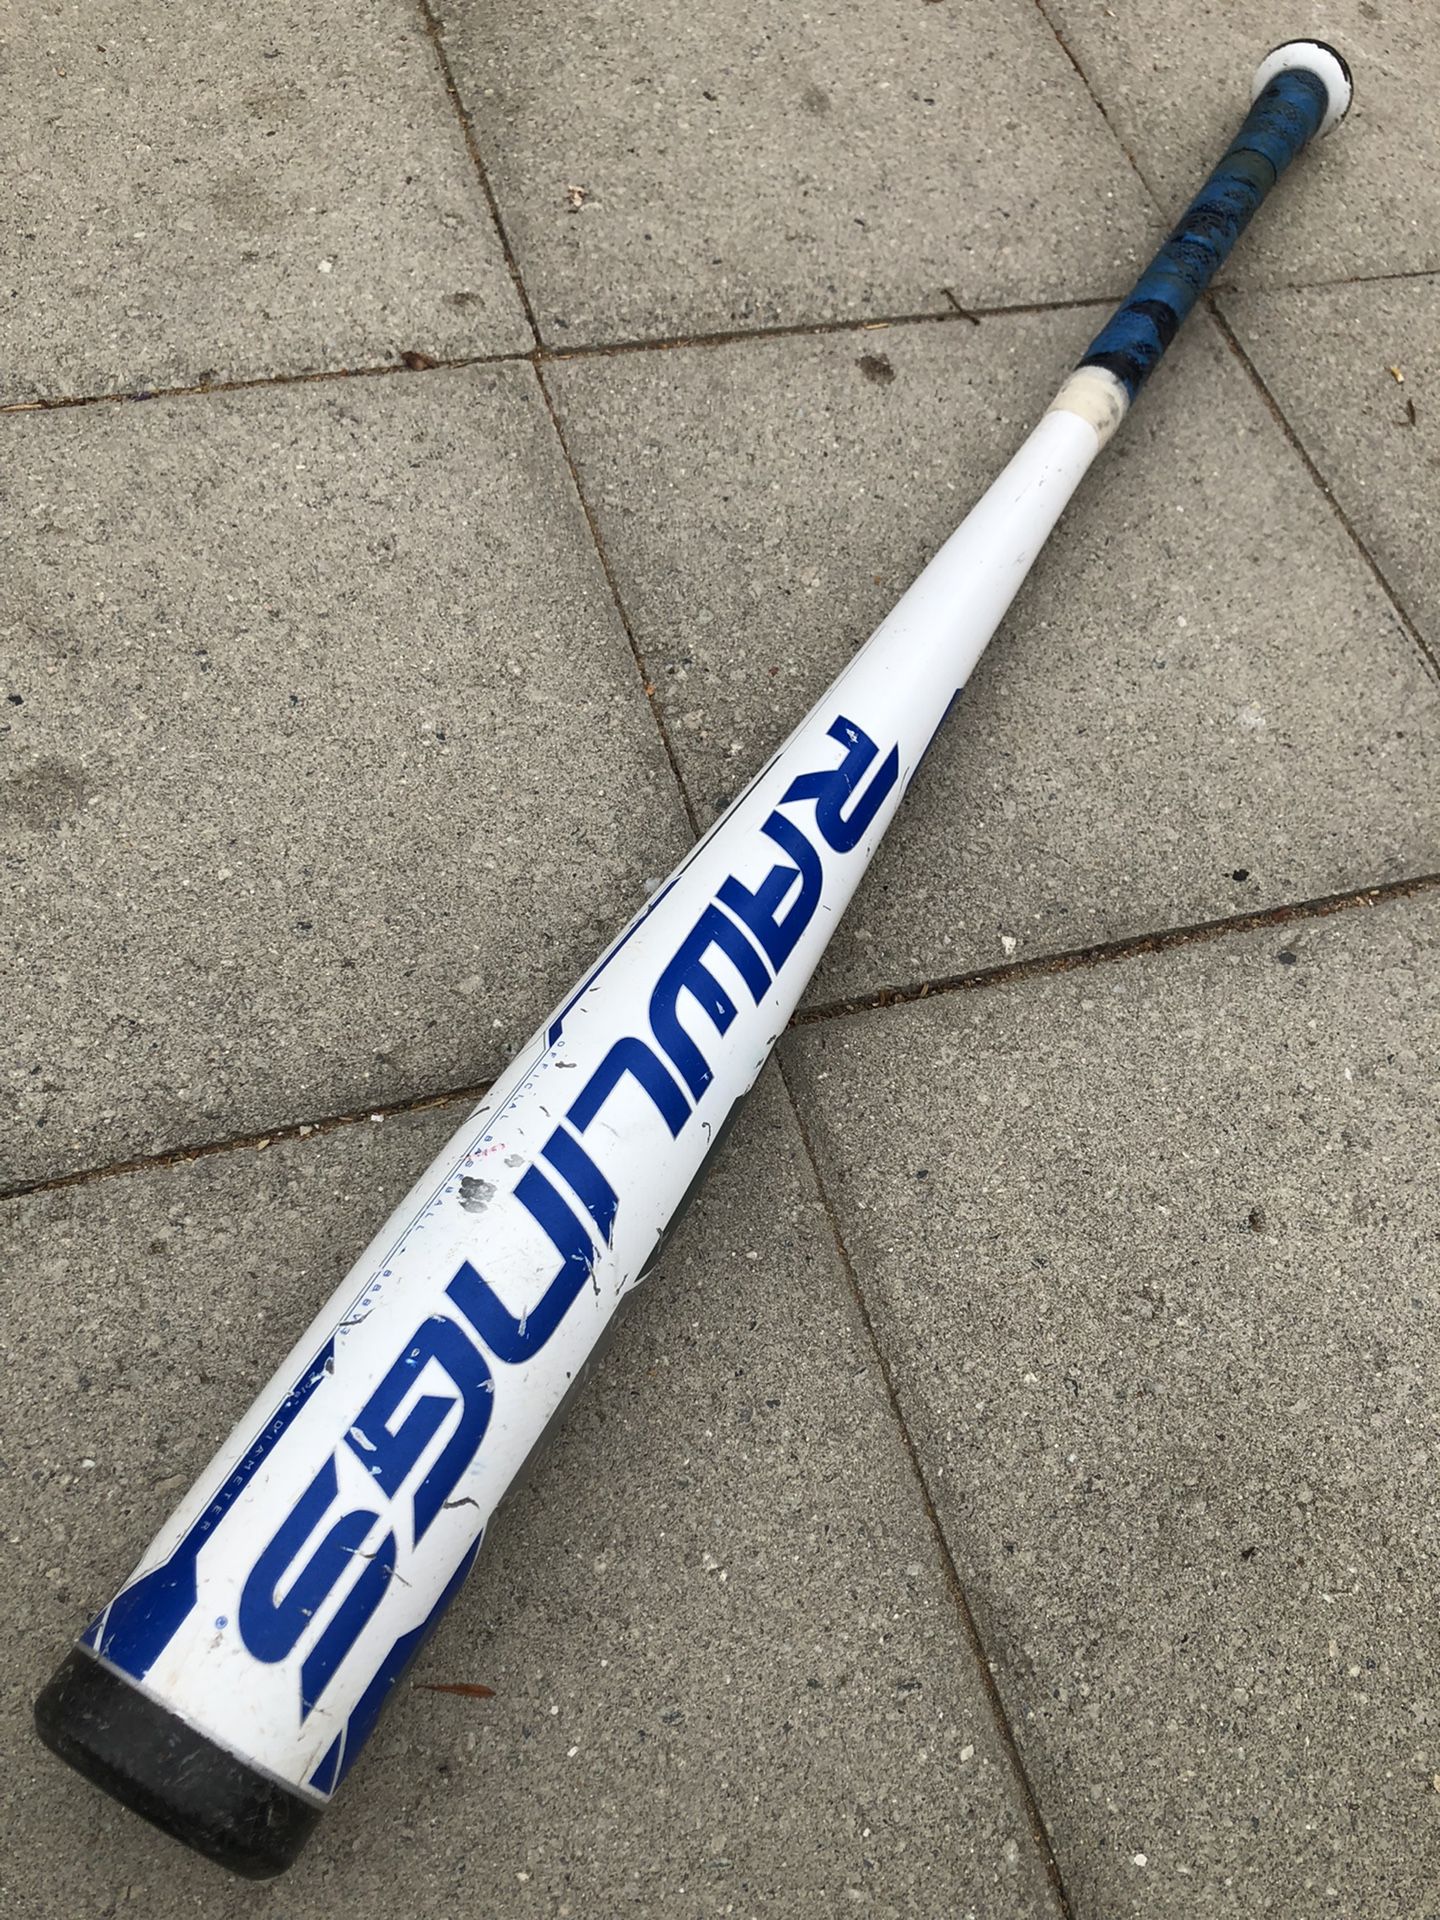 2018 Rawlings Velo Baseball Bat BBCOR Certified. 32in 29oz In Solid Condition Have More Equipment 